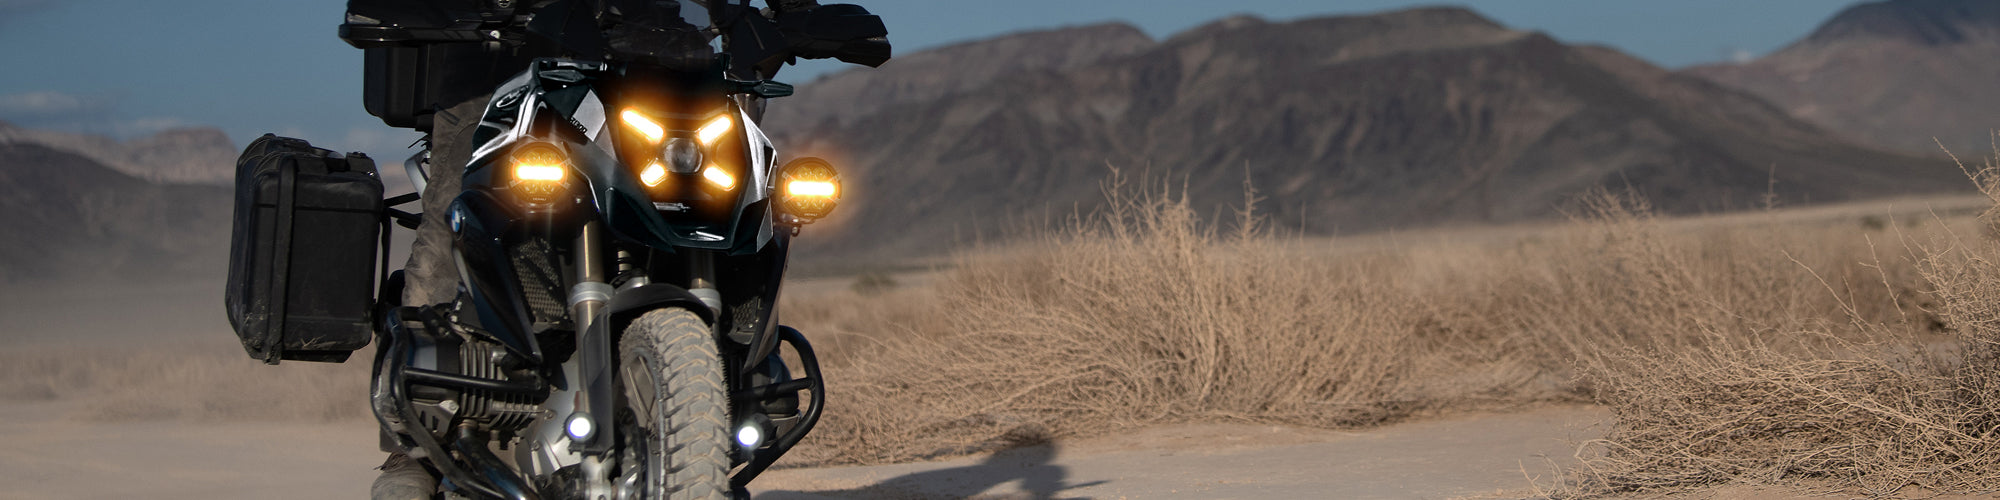 New Motorcycle LED Lighting Technology Released at EICMA 2023 by DENALI Electronics